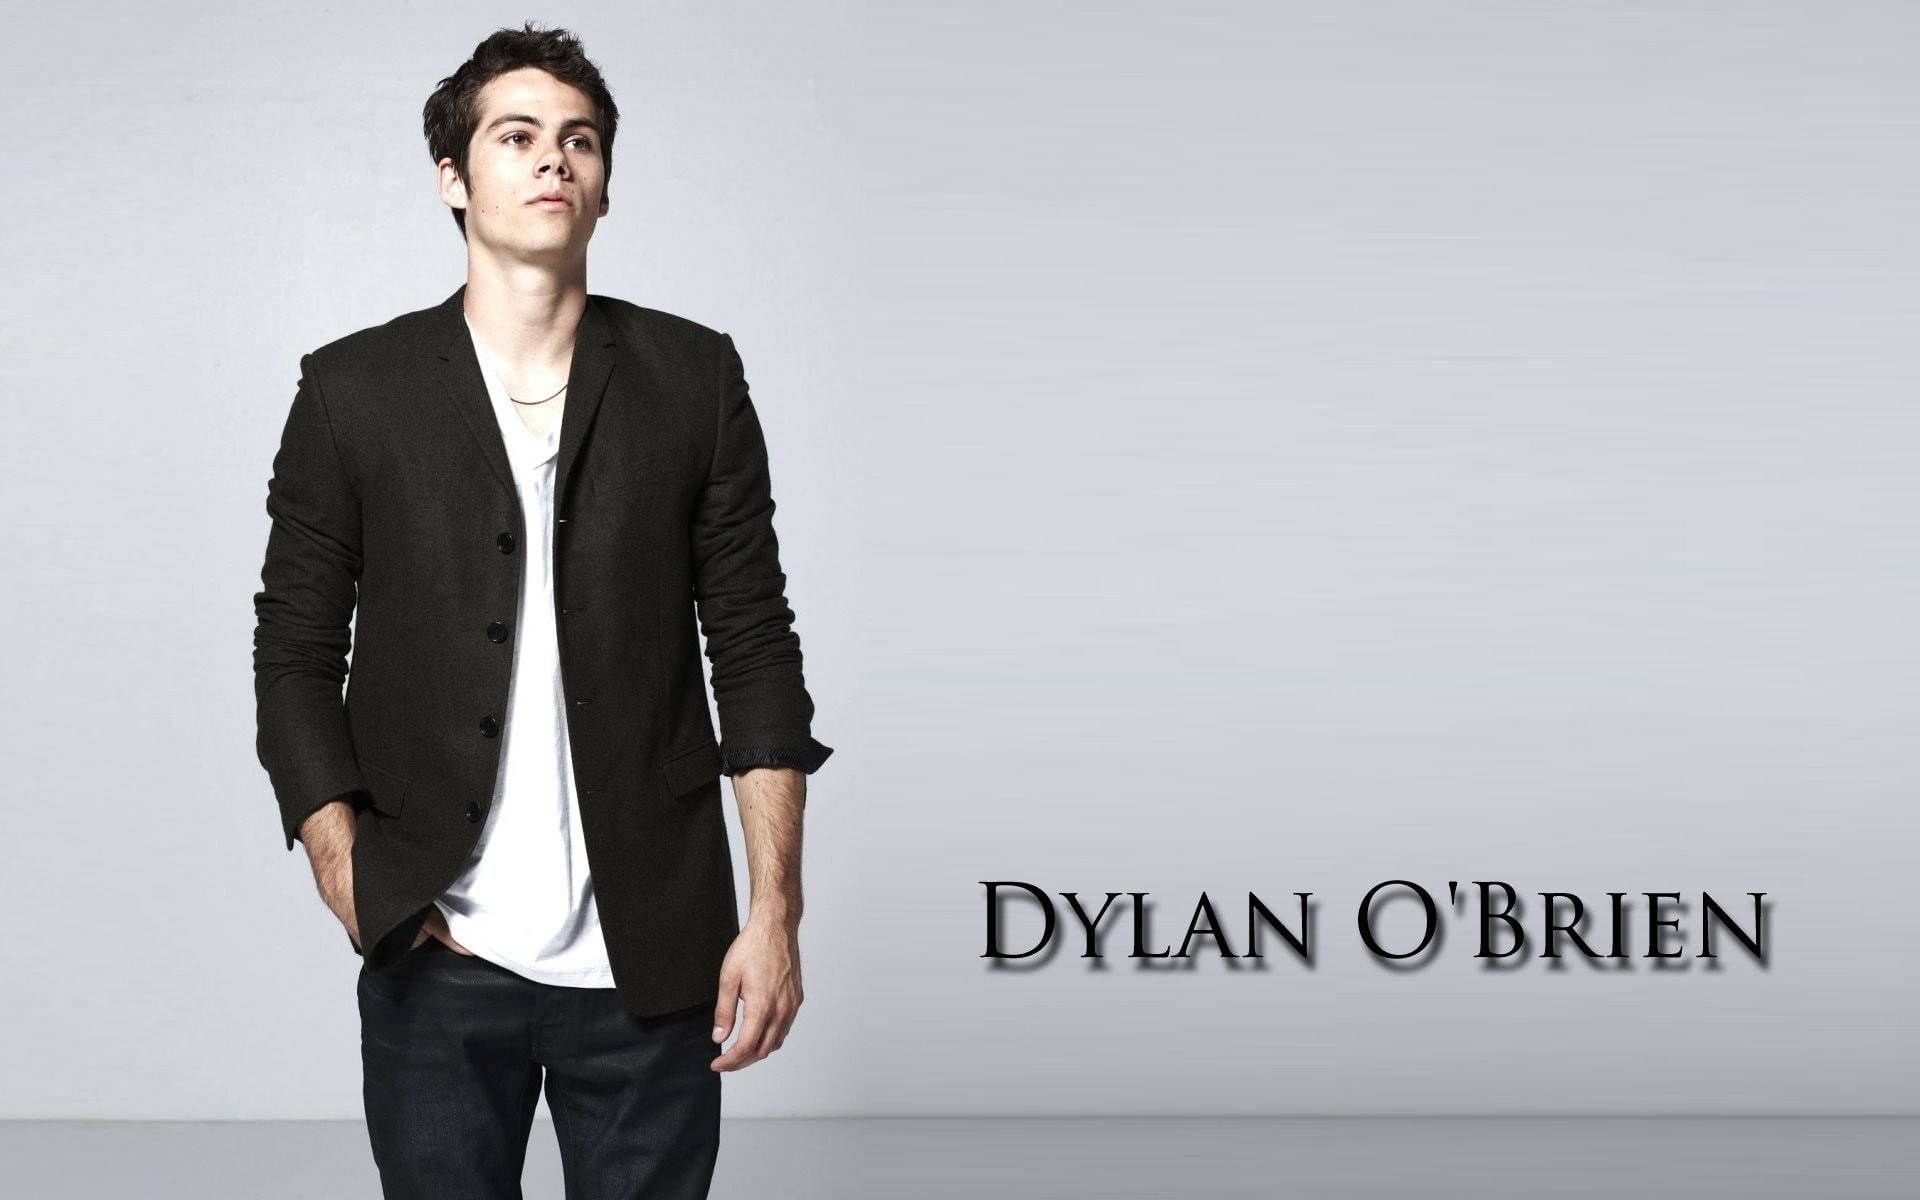 Dylan O'brien Teen Wolf Photoshoot Background